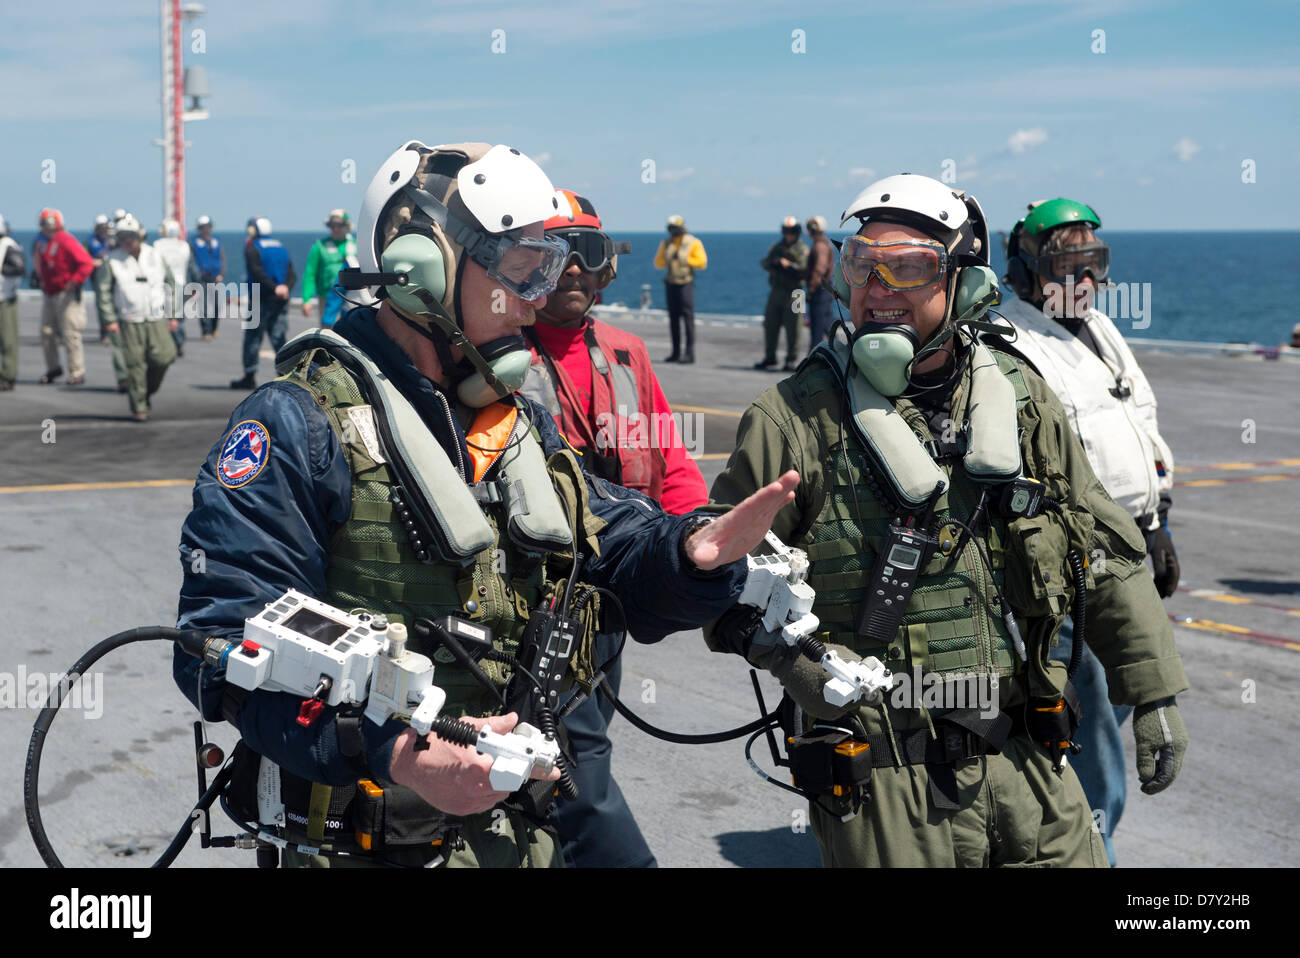 Dave Lorenz, left, and Bruce McFadden, deck operators for Northrop Grumman, discuss the launch of an X-47B  Unmanned Combat Air System aircraft prior to launch on the aircraft carrier USS George H.W. Bush May 14, 2013 in the Atlantic Ocean. The George H.W. Bush is the first aircraft carrier to successfully catapult launch an unmanned aircraft from its flight deck. Stock Photo